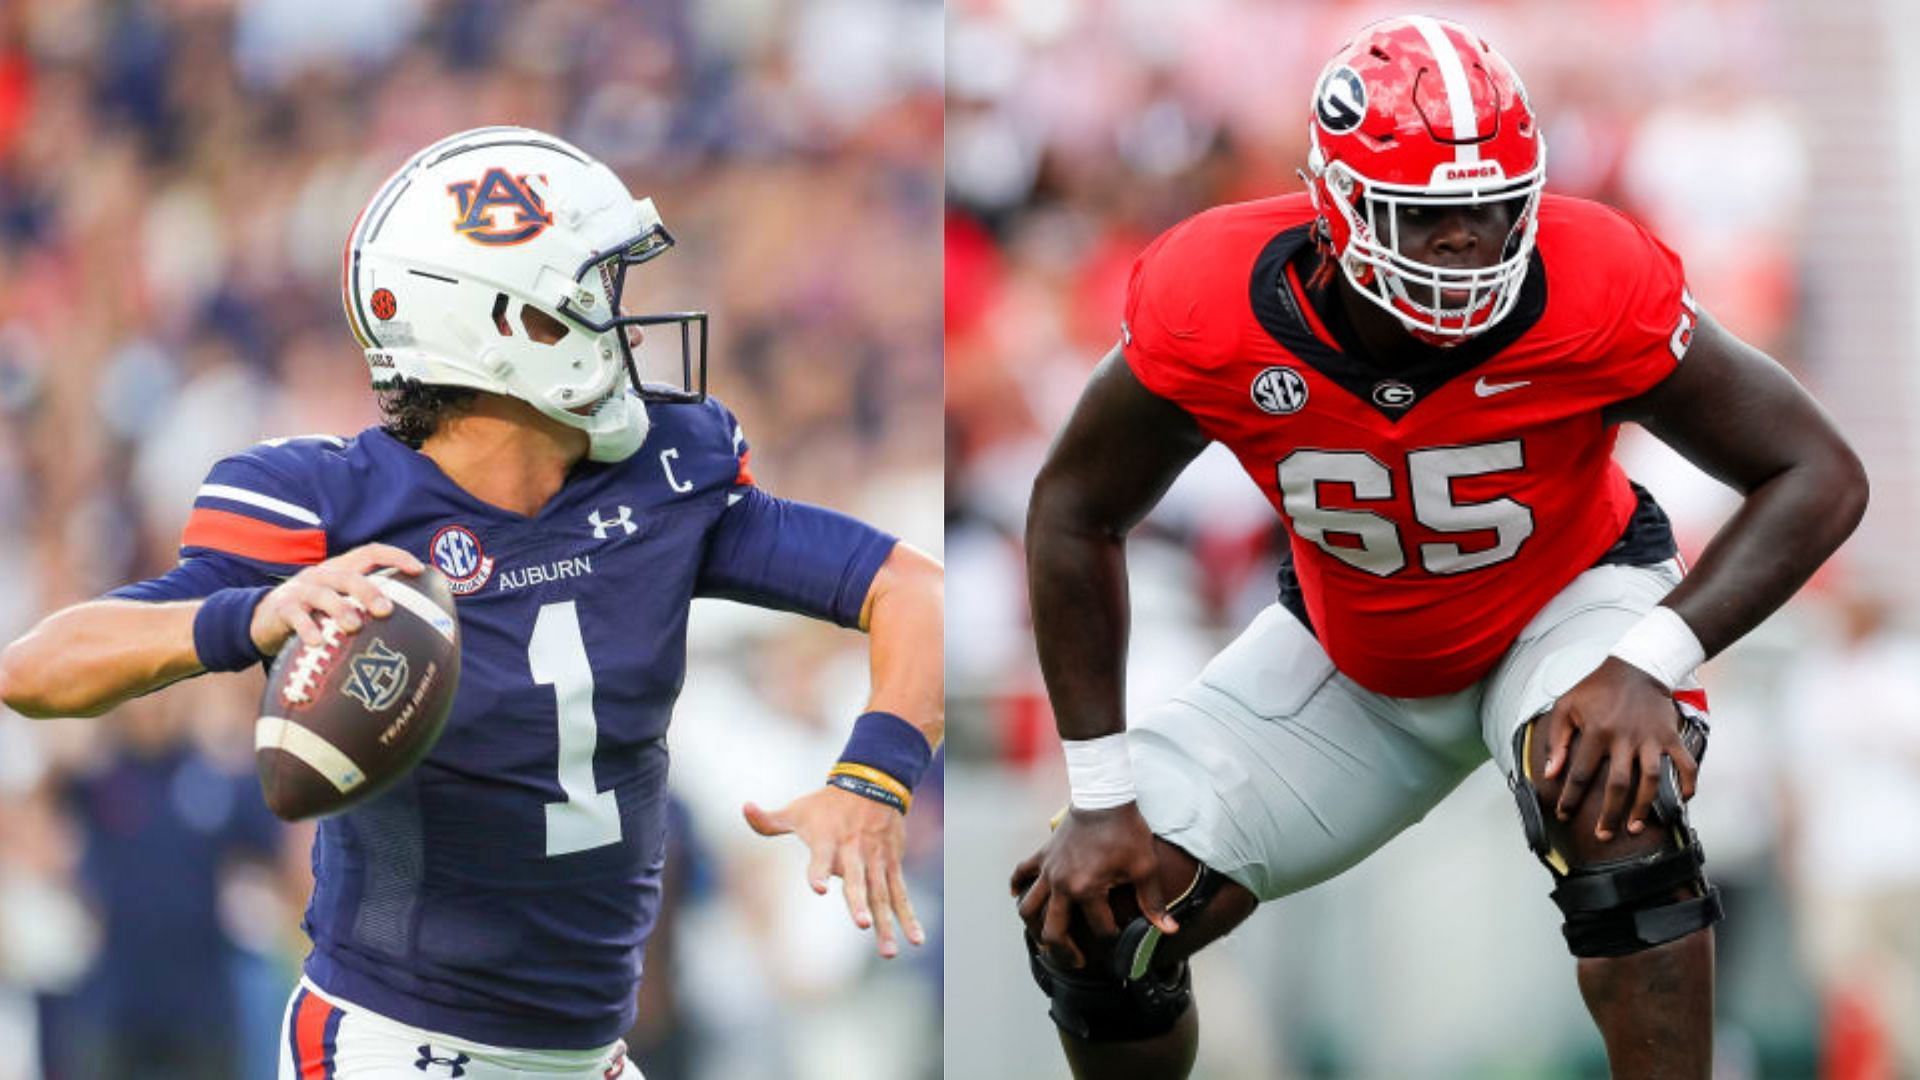 Auburn and Georgia are two of the biggest rivals in college football